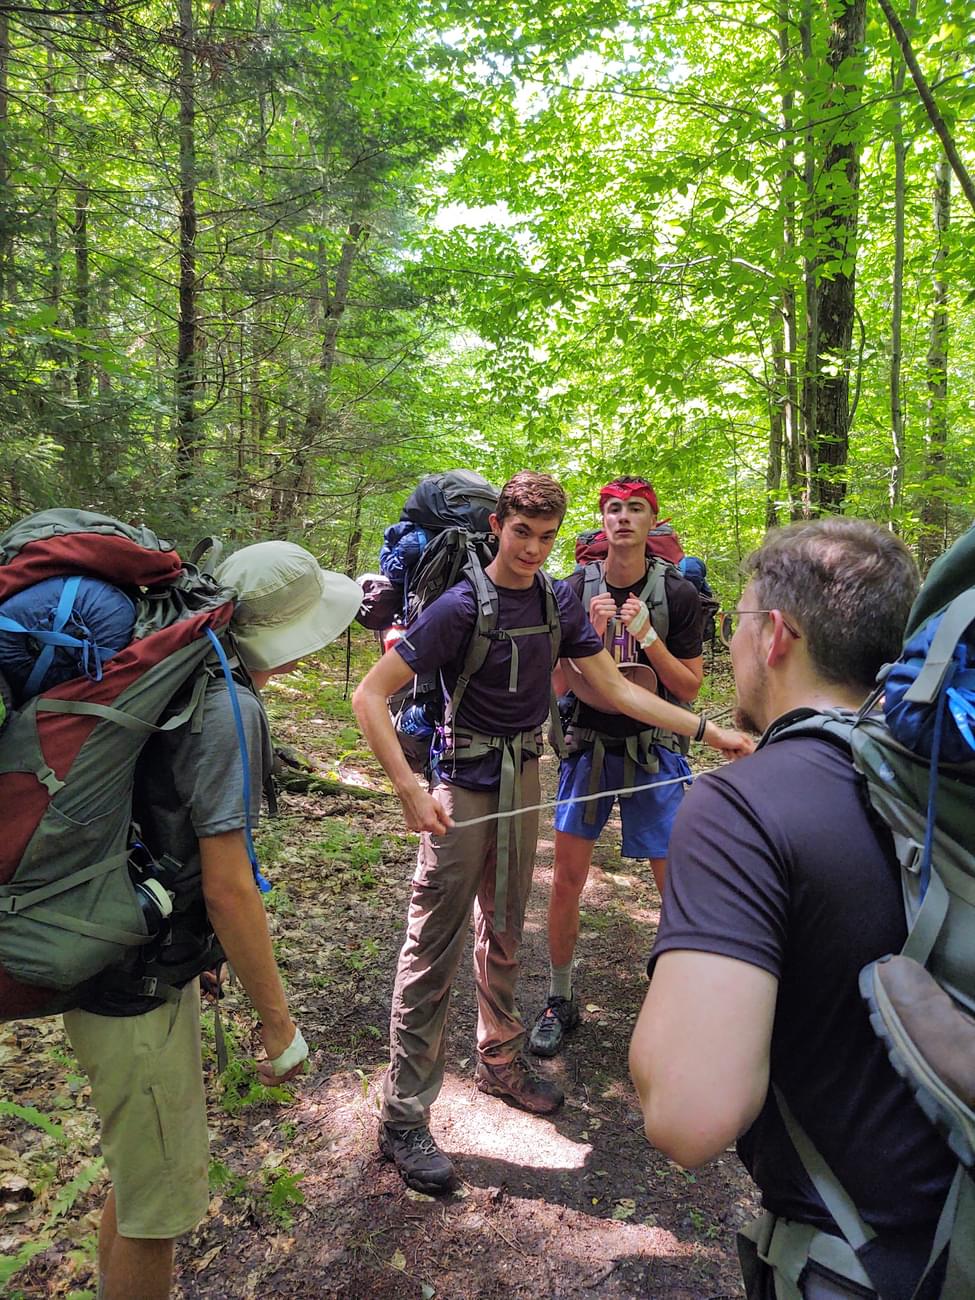 Houghton students standing together in forest with backpack gear.